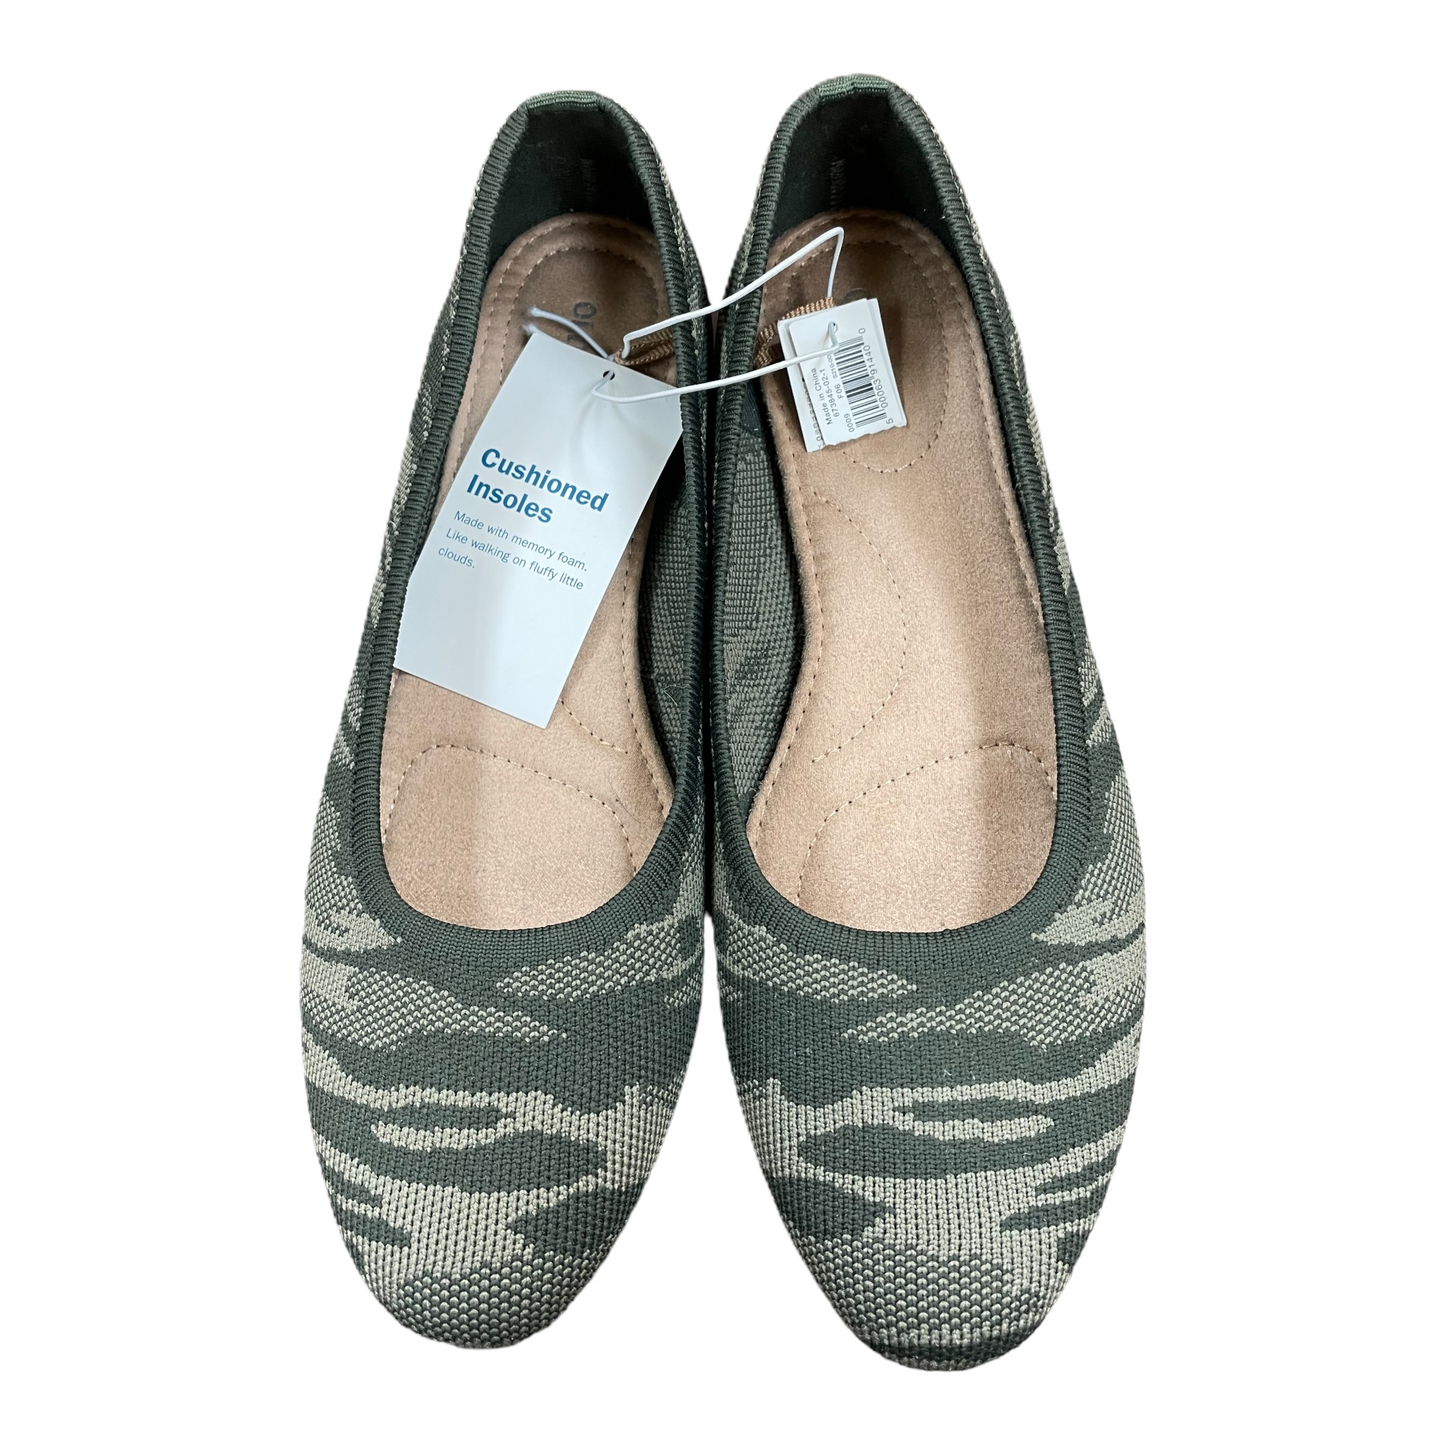 Camouflage Print Shoes Flats By Old Navy, Size: 9